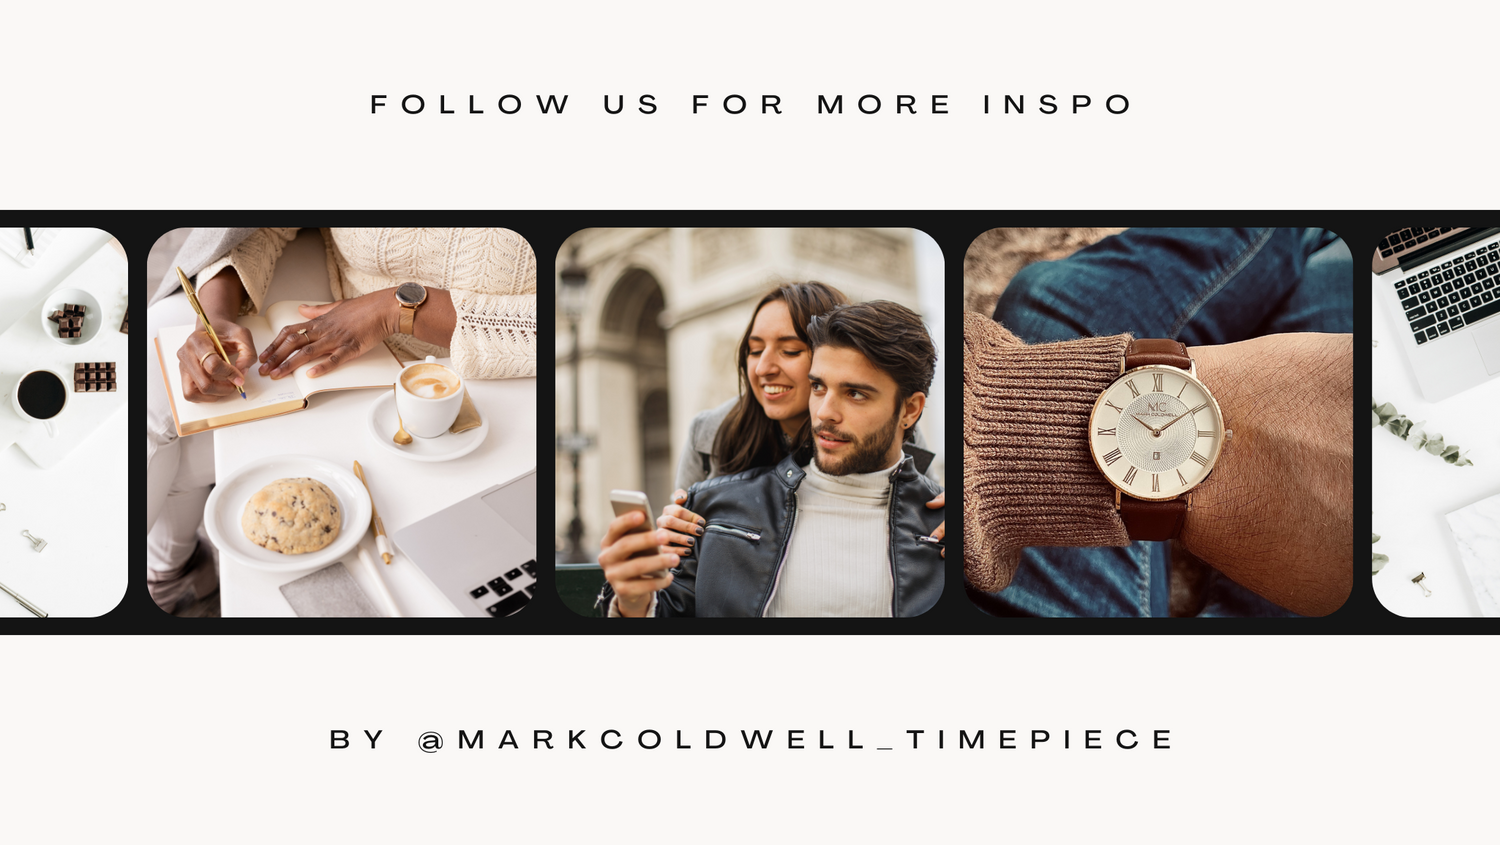 A group of people wearing the Mark Coldwell timepiece on their wrists, showcasing the watch's stylish design and versatility